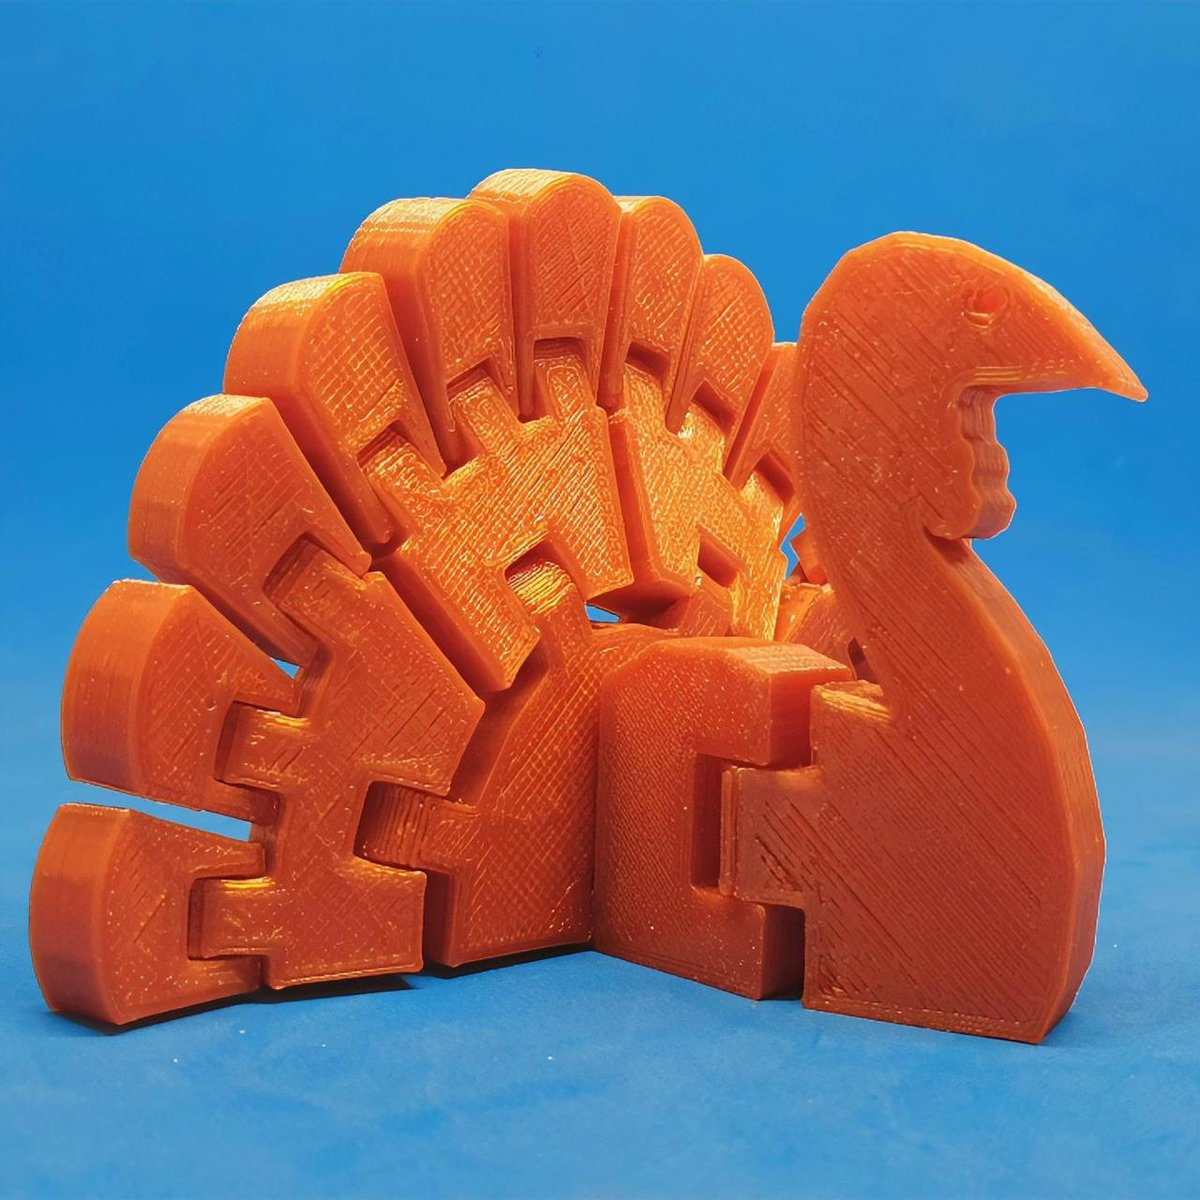 This articulated turkey prints in just two pieces